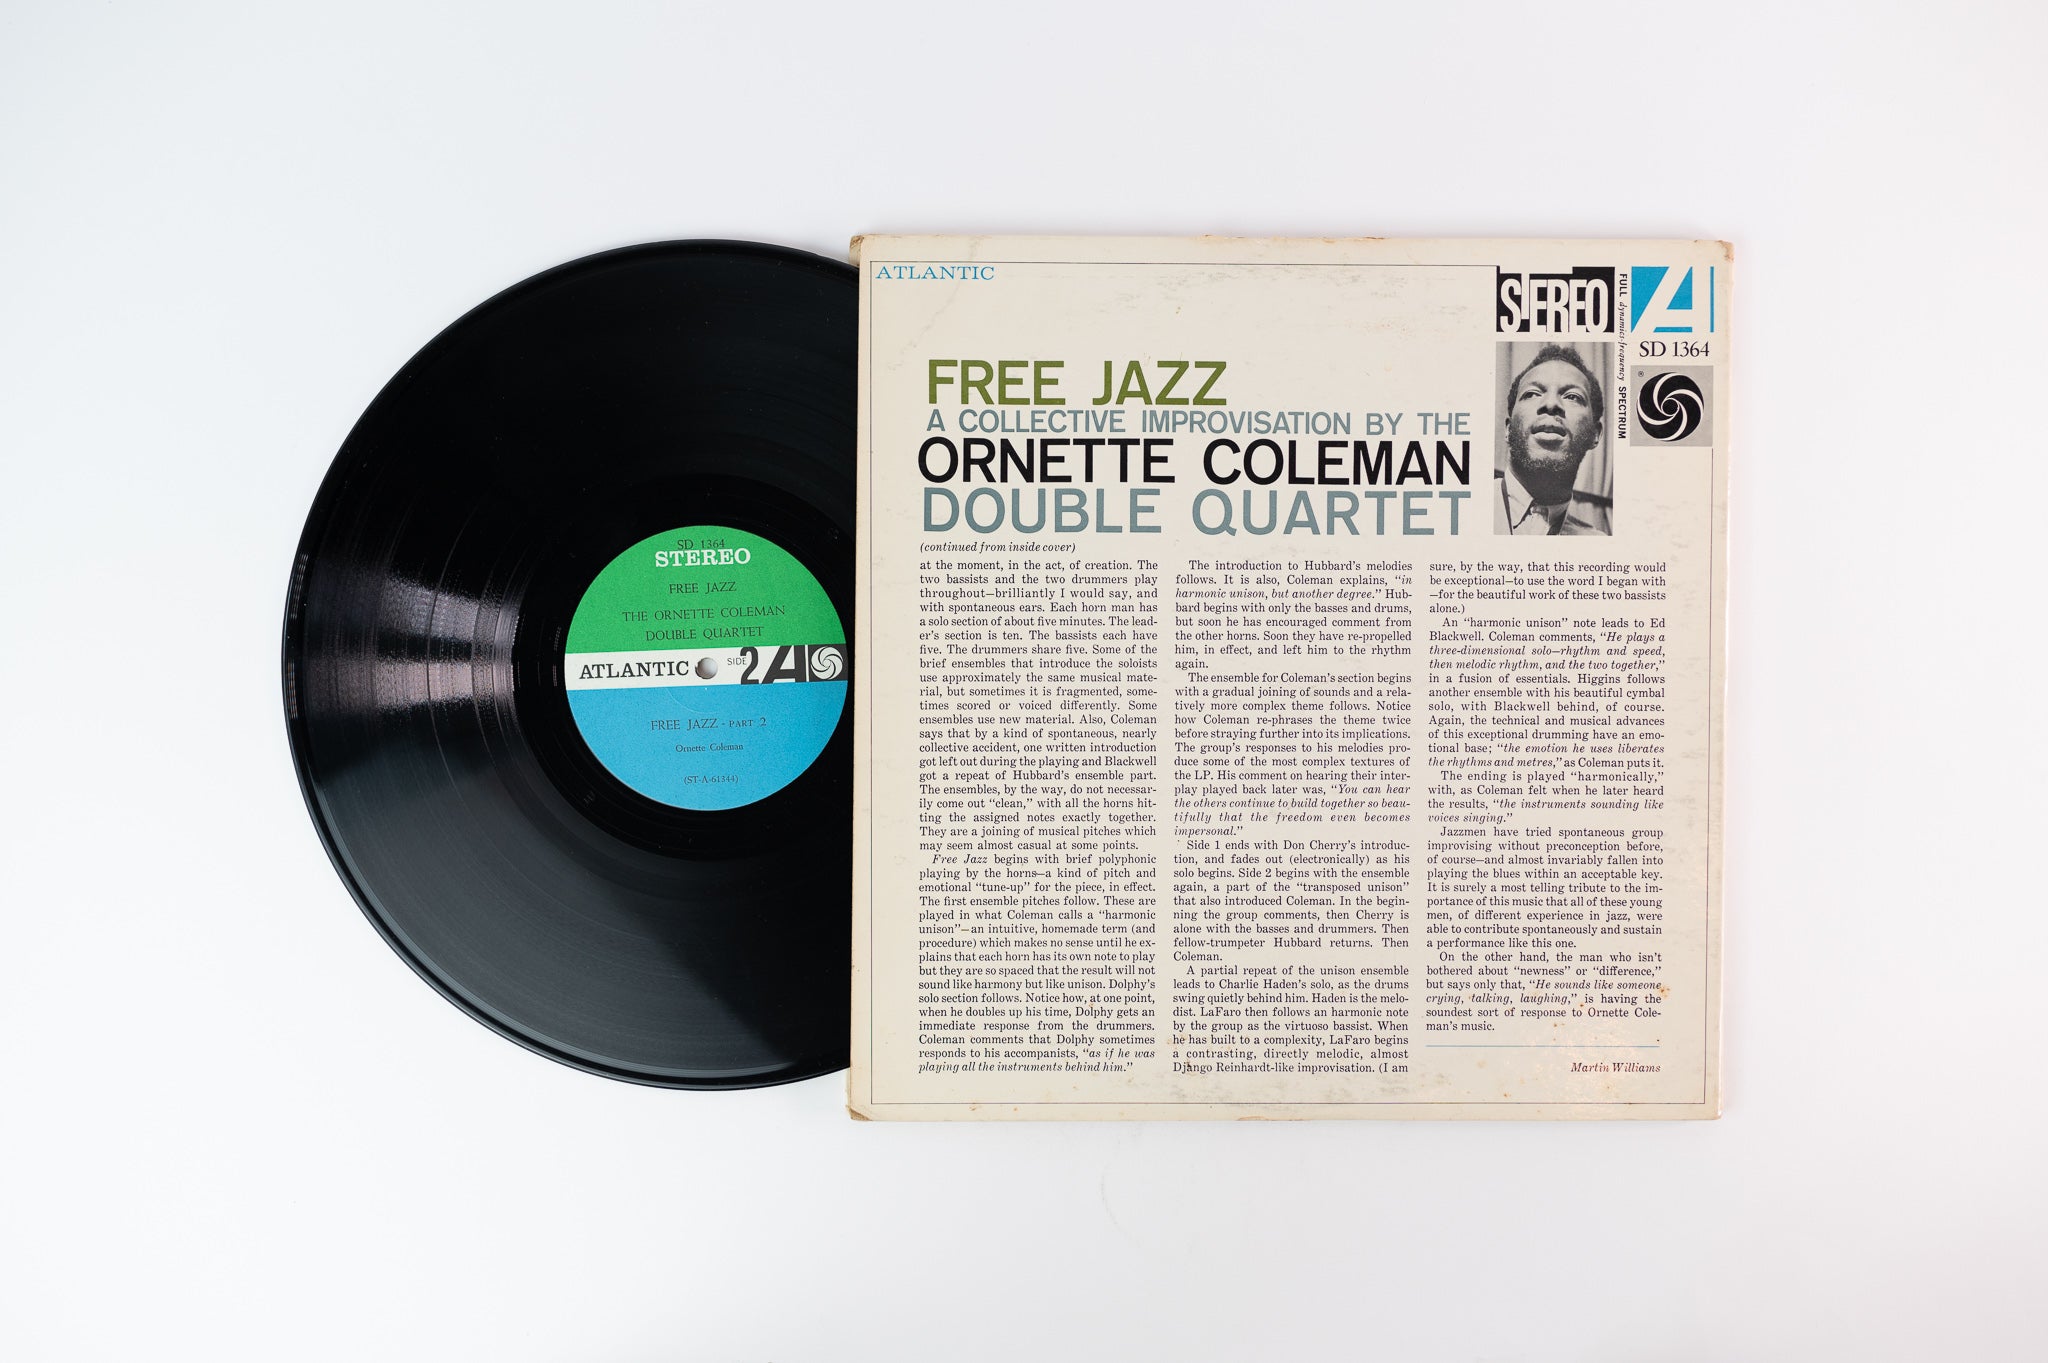 The Ornette Coleman Double Quartet - Free Jazz on Atlantic Stereo Green / Blue label with White Fan Logo